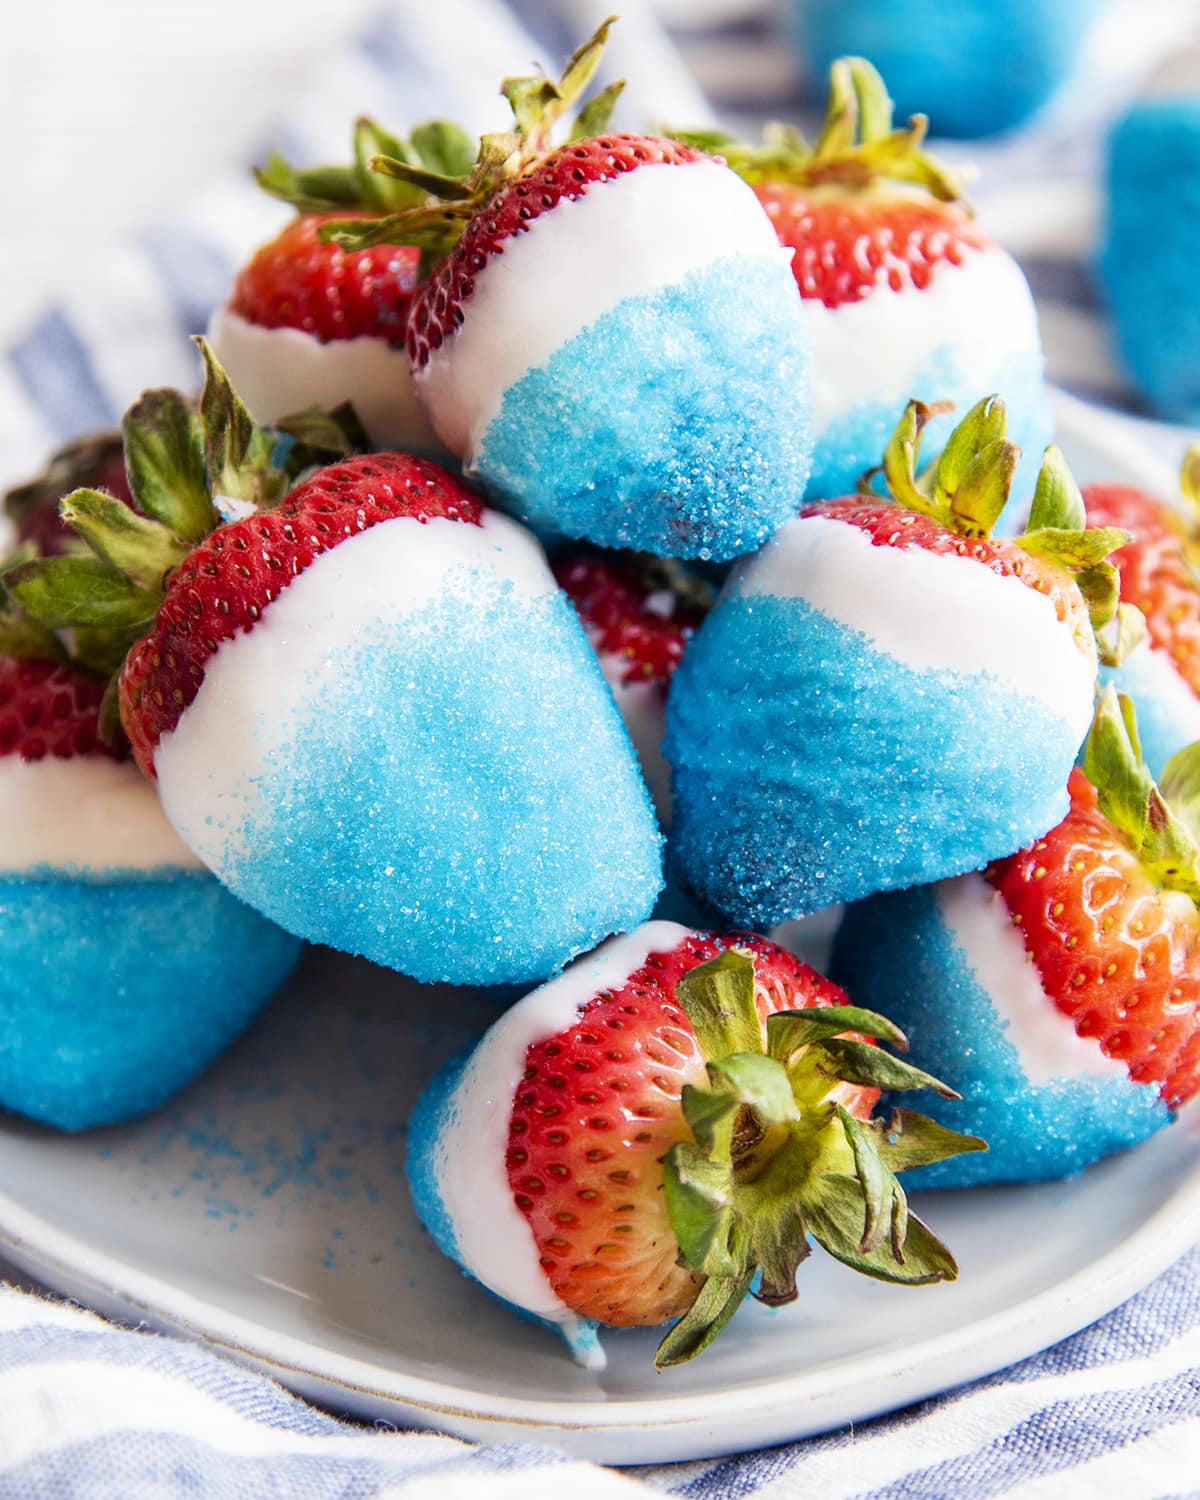 A pile of red white and blue dipped strawberries on a plate.